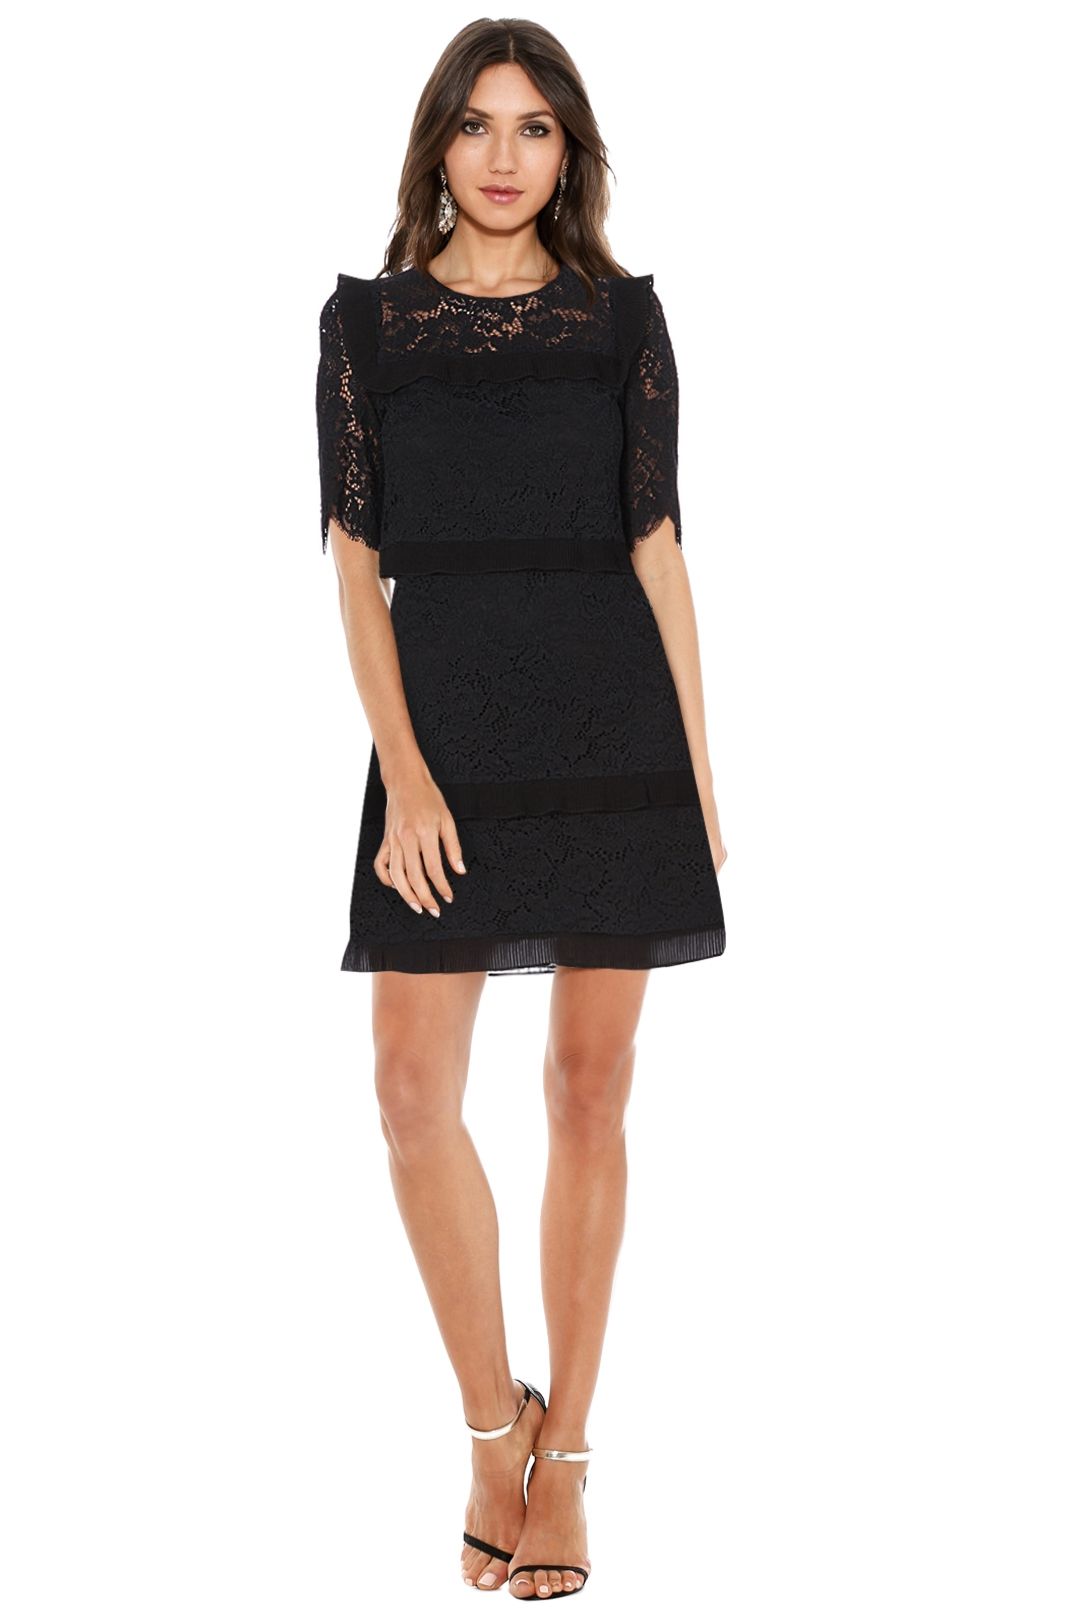 Claudie Peirlot - The Rivale Tiered Lace Dress - Black - Front